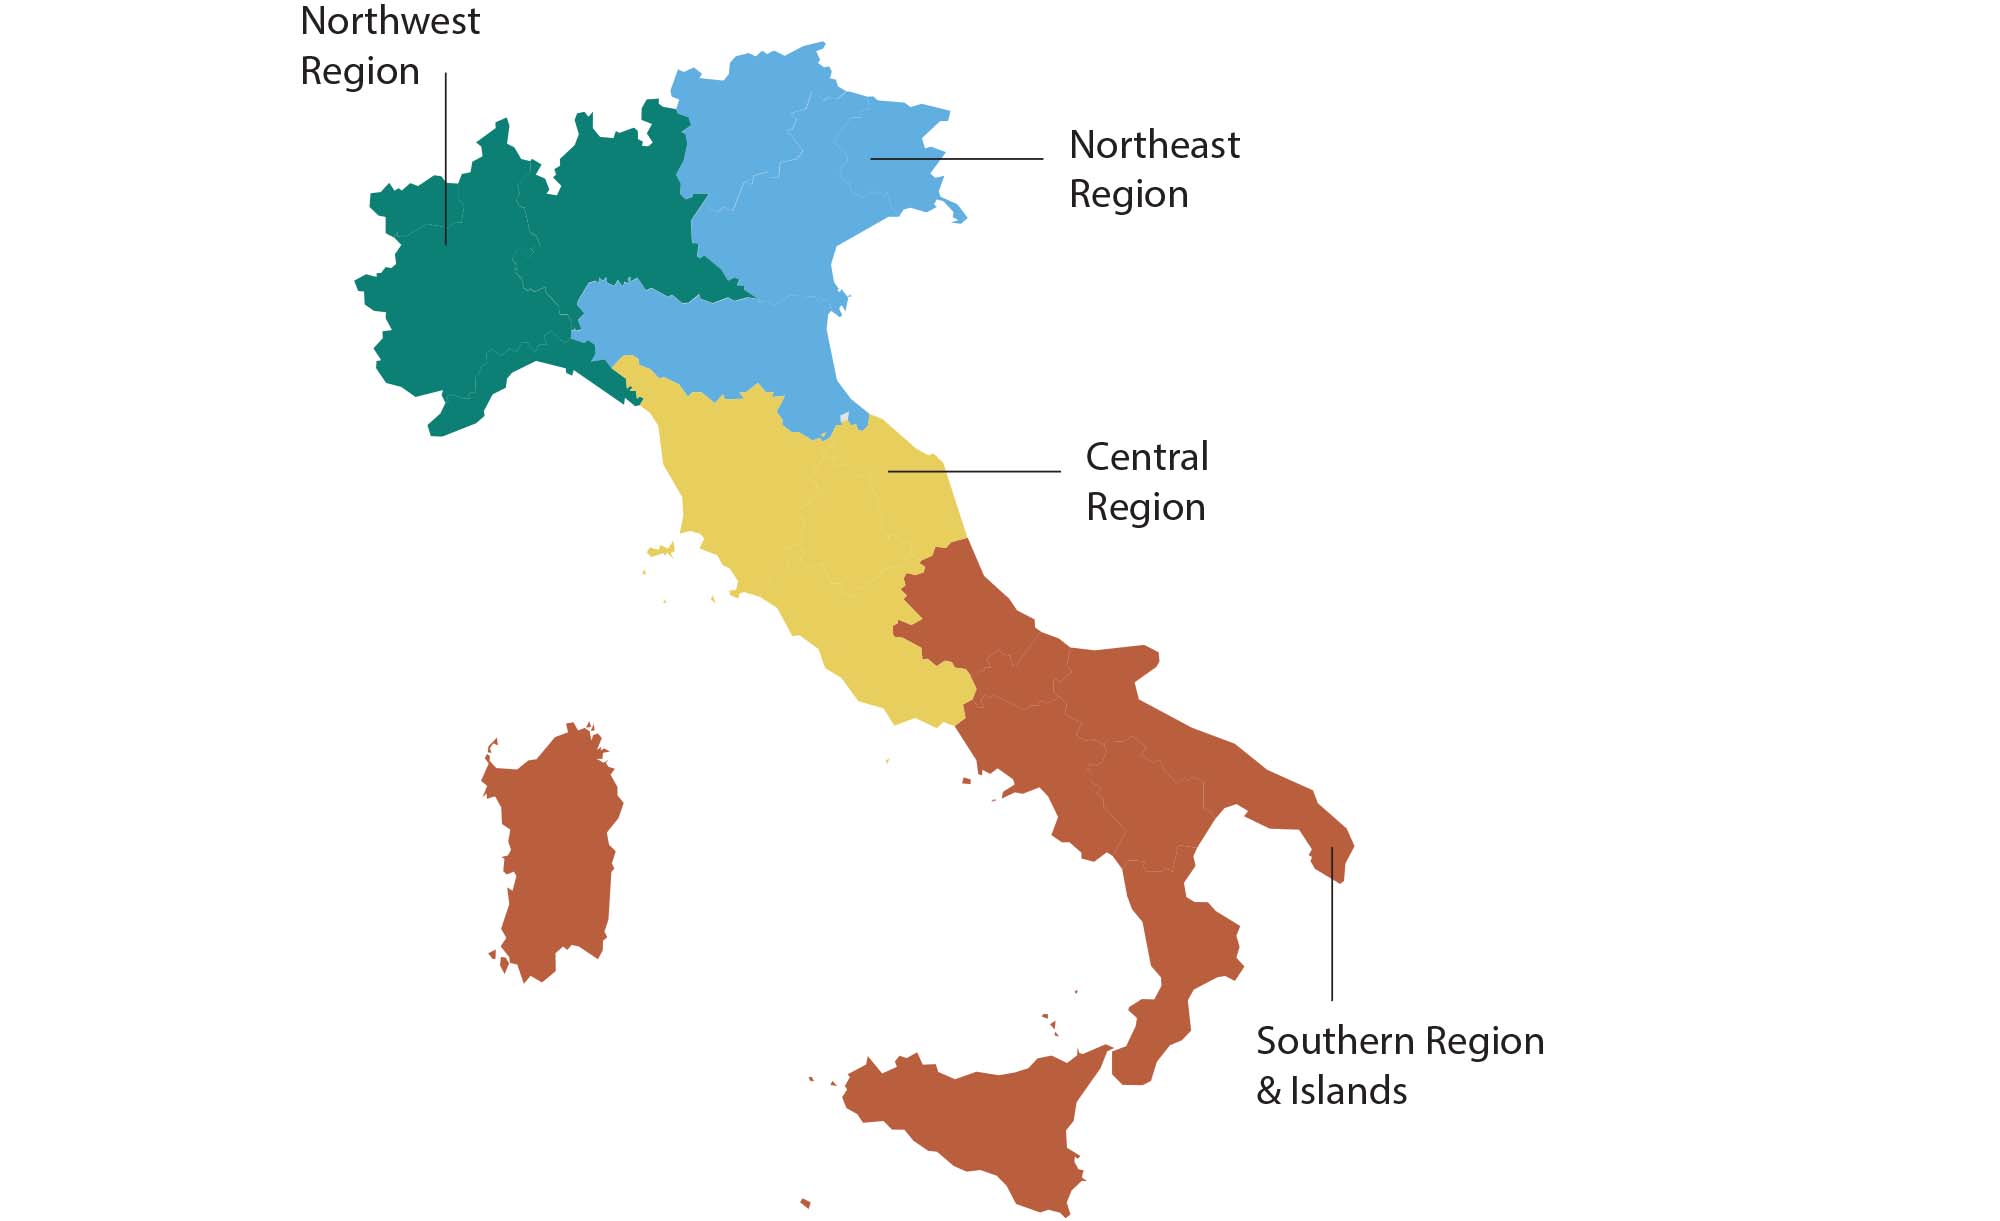 Map of Italian wine regions: Northwest, Northeast, Central, and Southern Region & Islands.